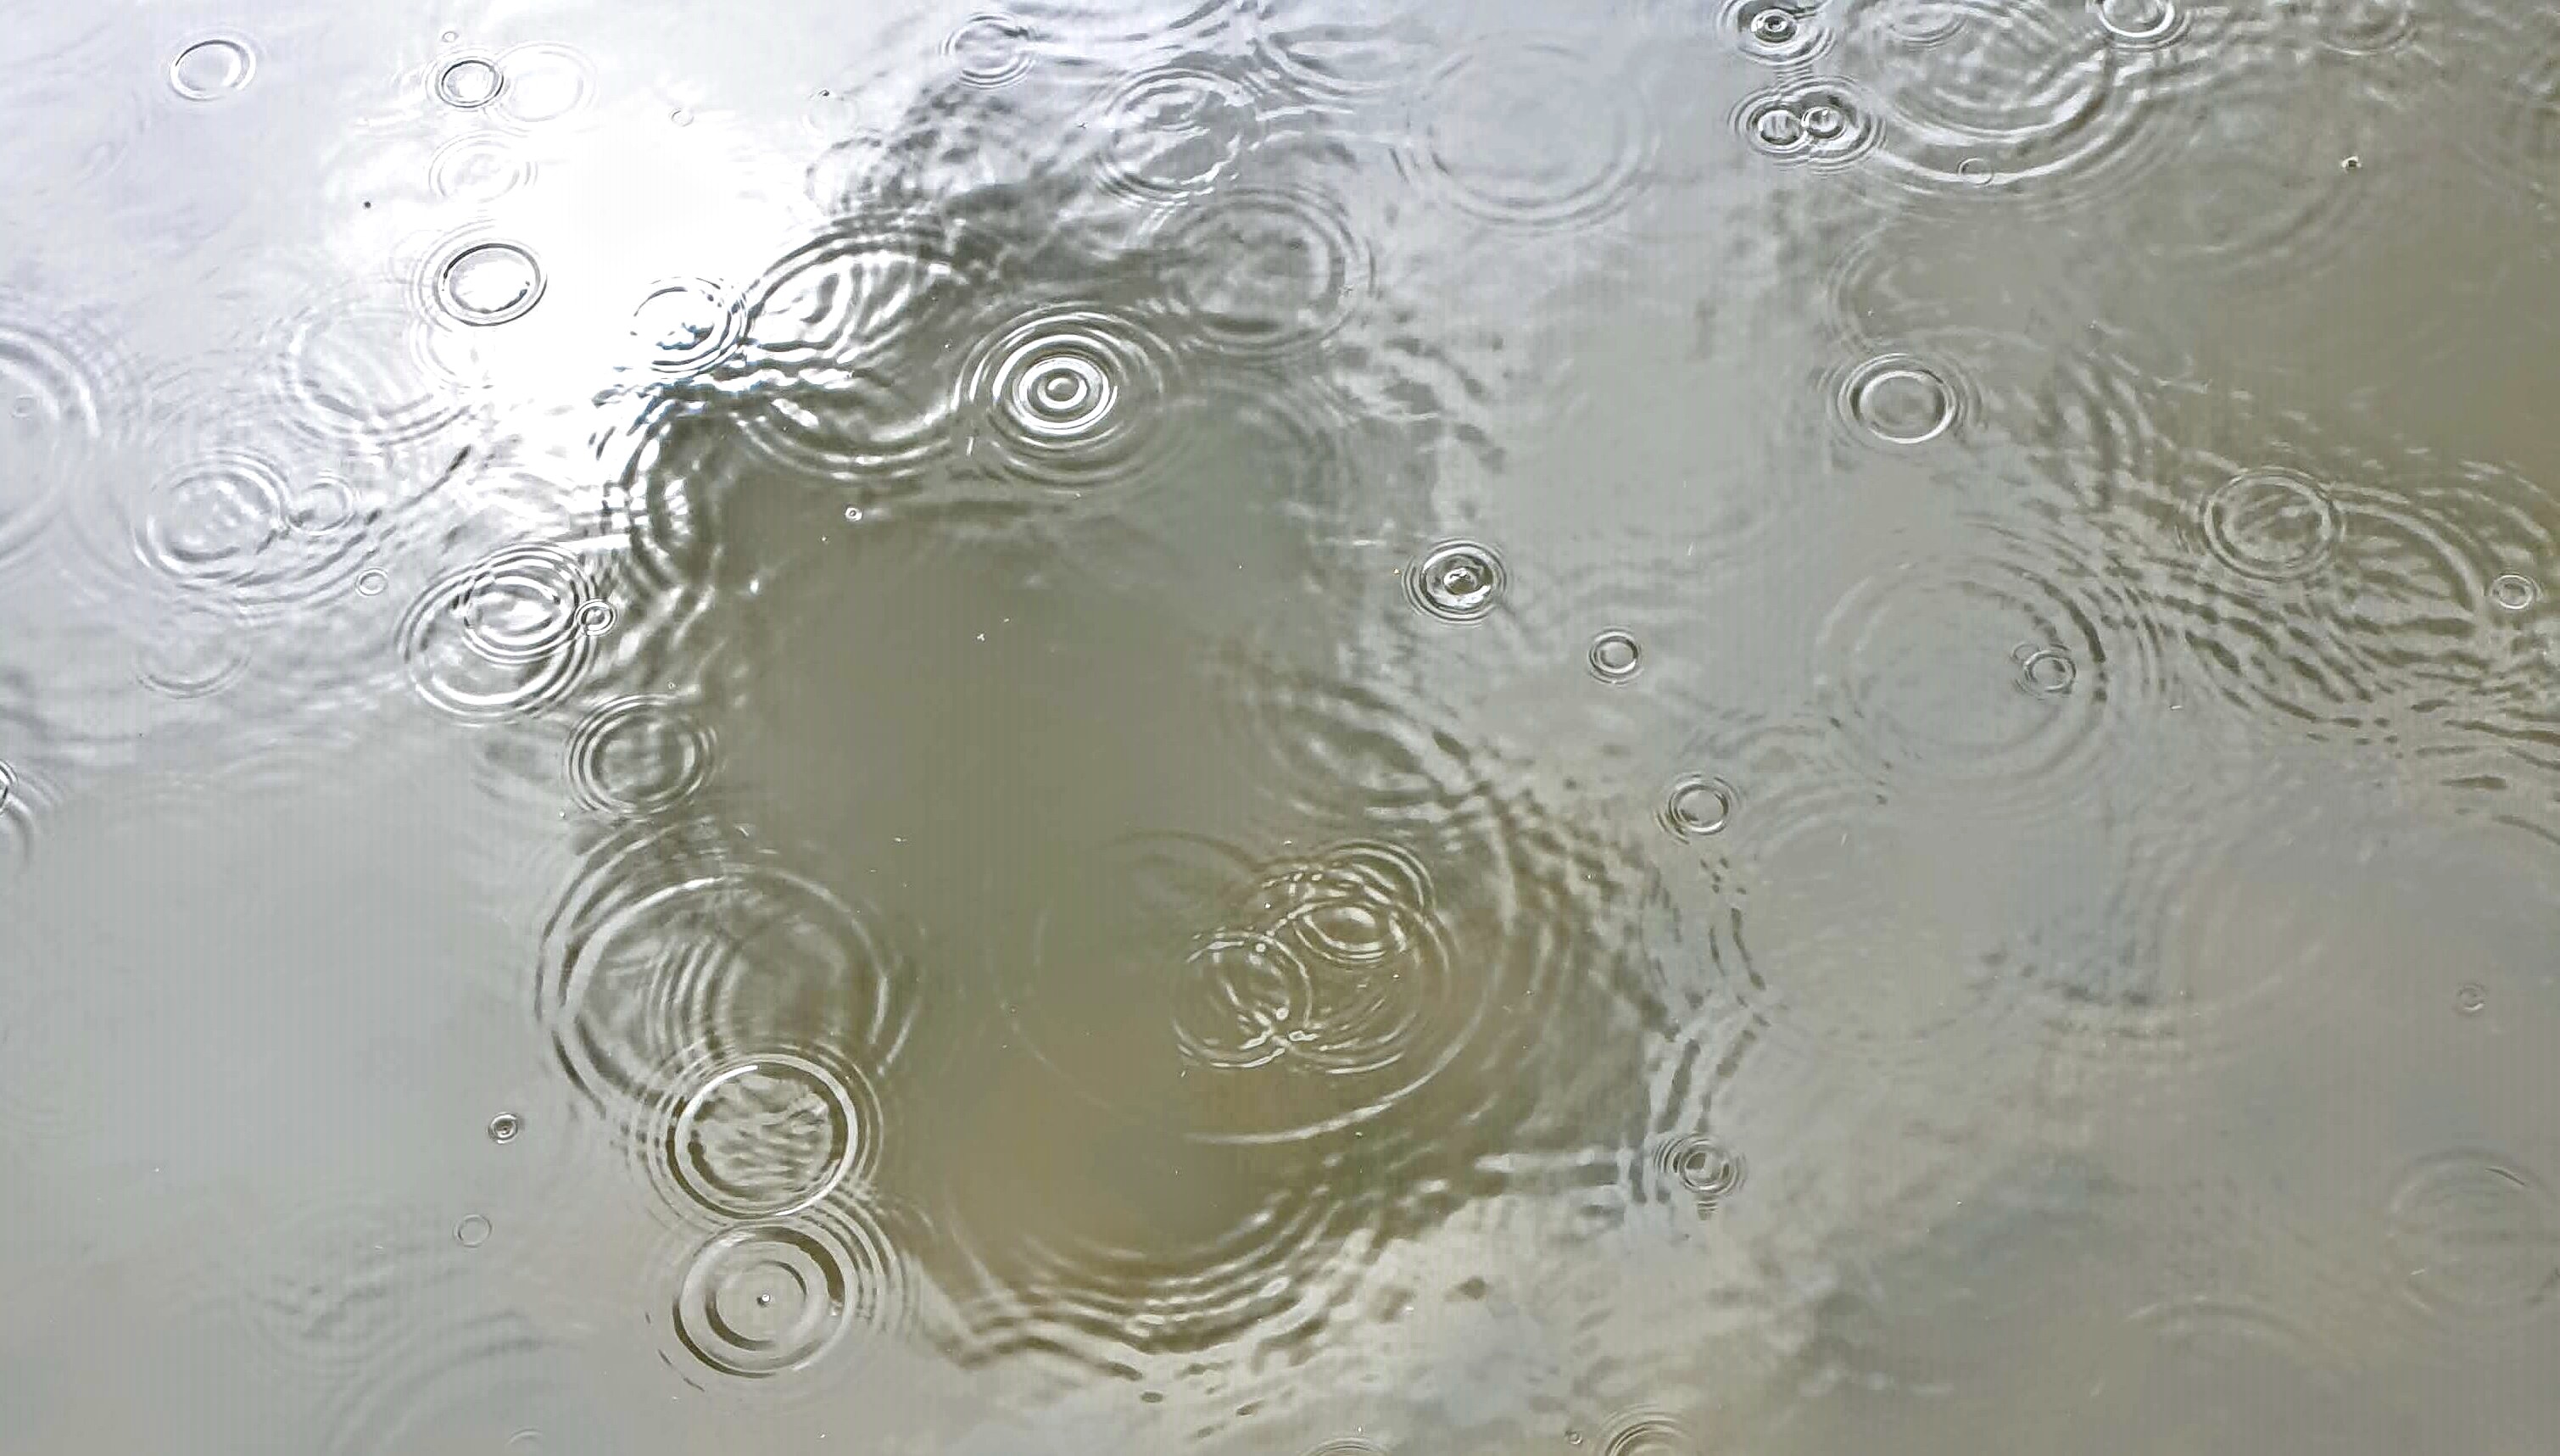 Name: Setayesh. Prize: First. When the rain drops touch the water they make waves that gradually get bigger. Rain drops hit the lake and make lots of little concentric circles in the water. Some of the circles are overlapping because the rain drops were closer together.